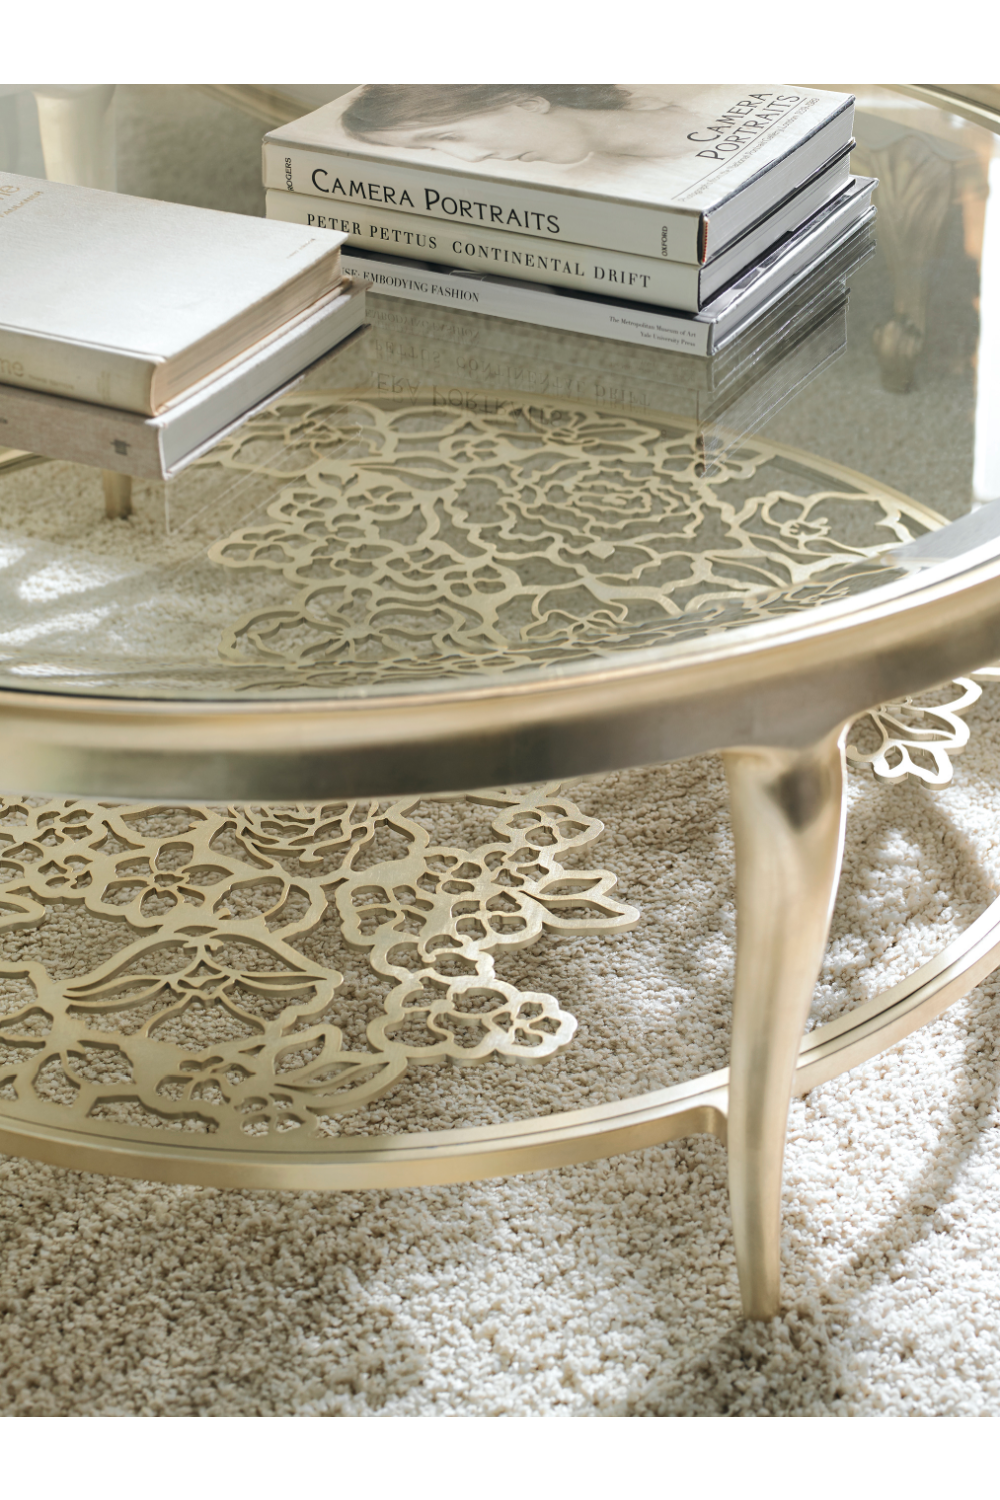 Floral Grille Coffee Table | Caracole Handpicked | Oroa.com